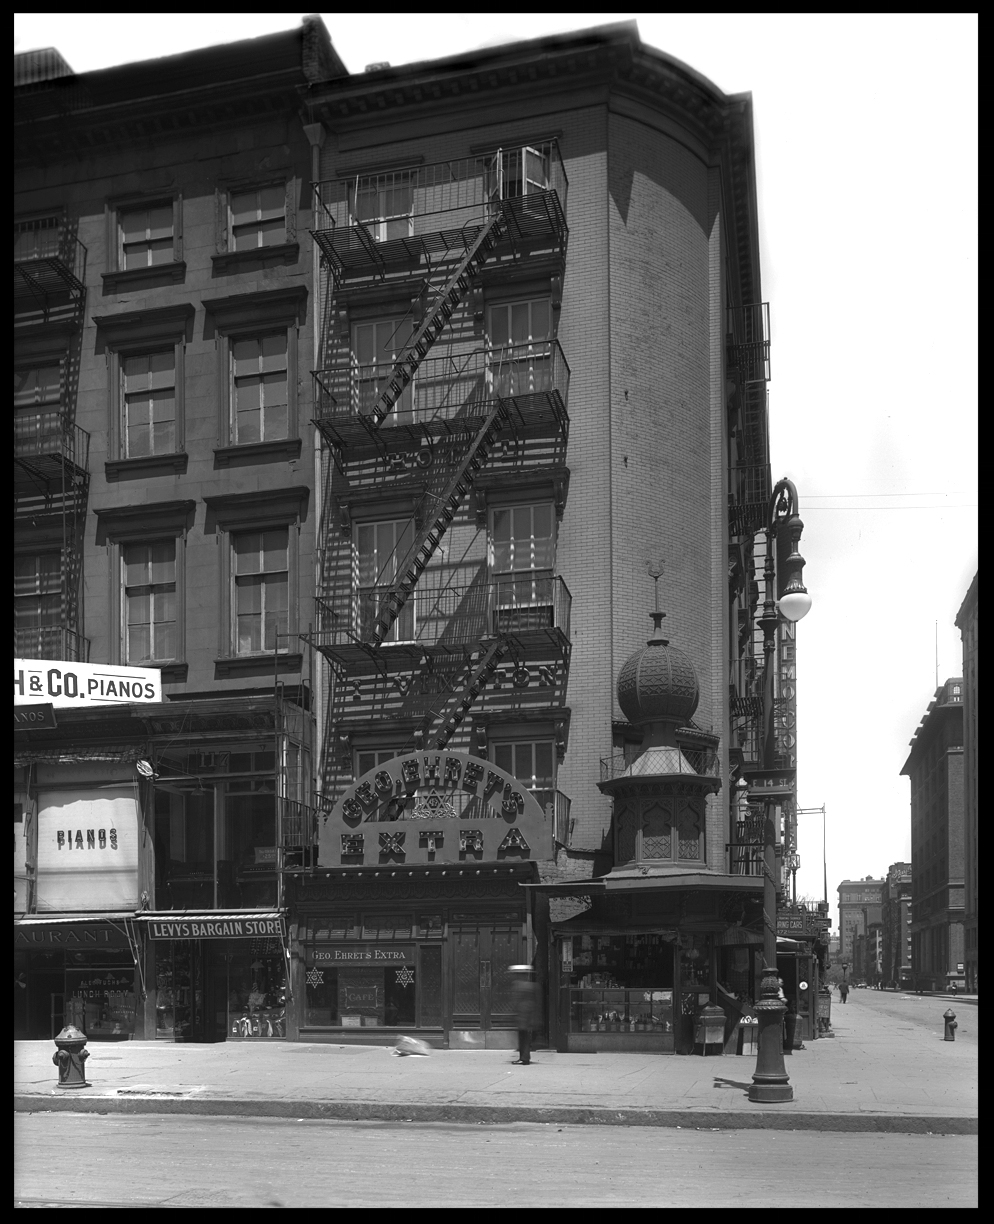 14th st & Irving Place c.1913 from original 8x10 negative